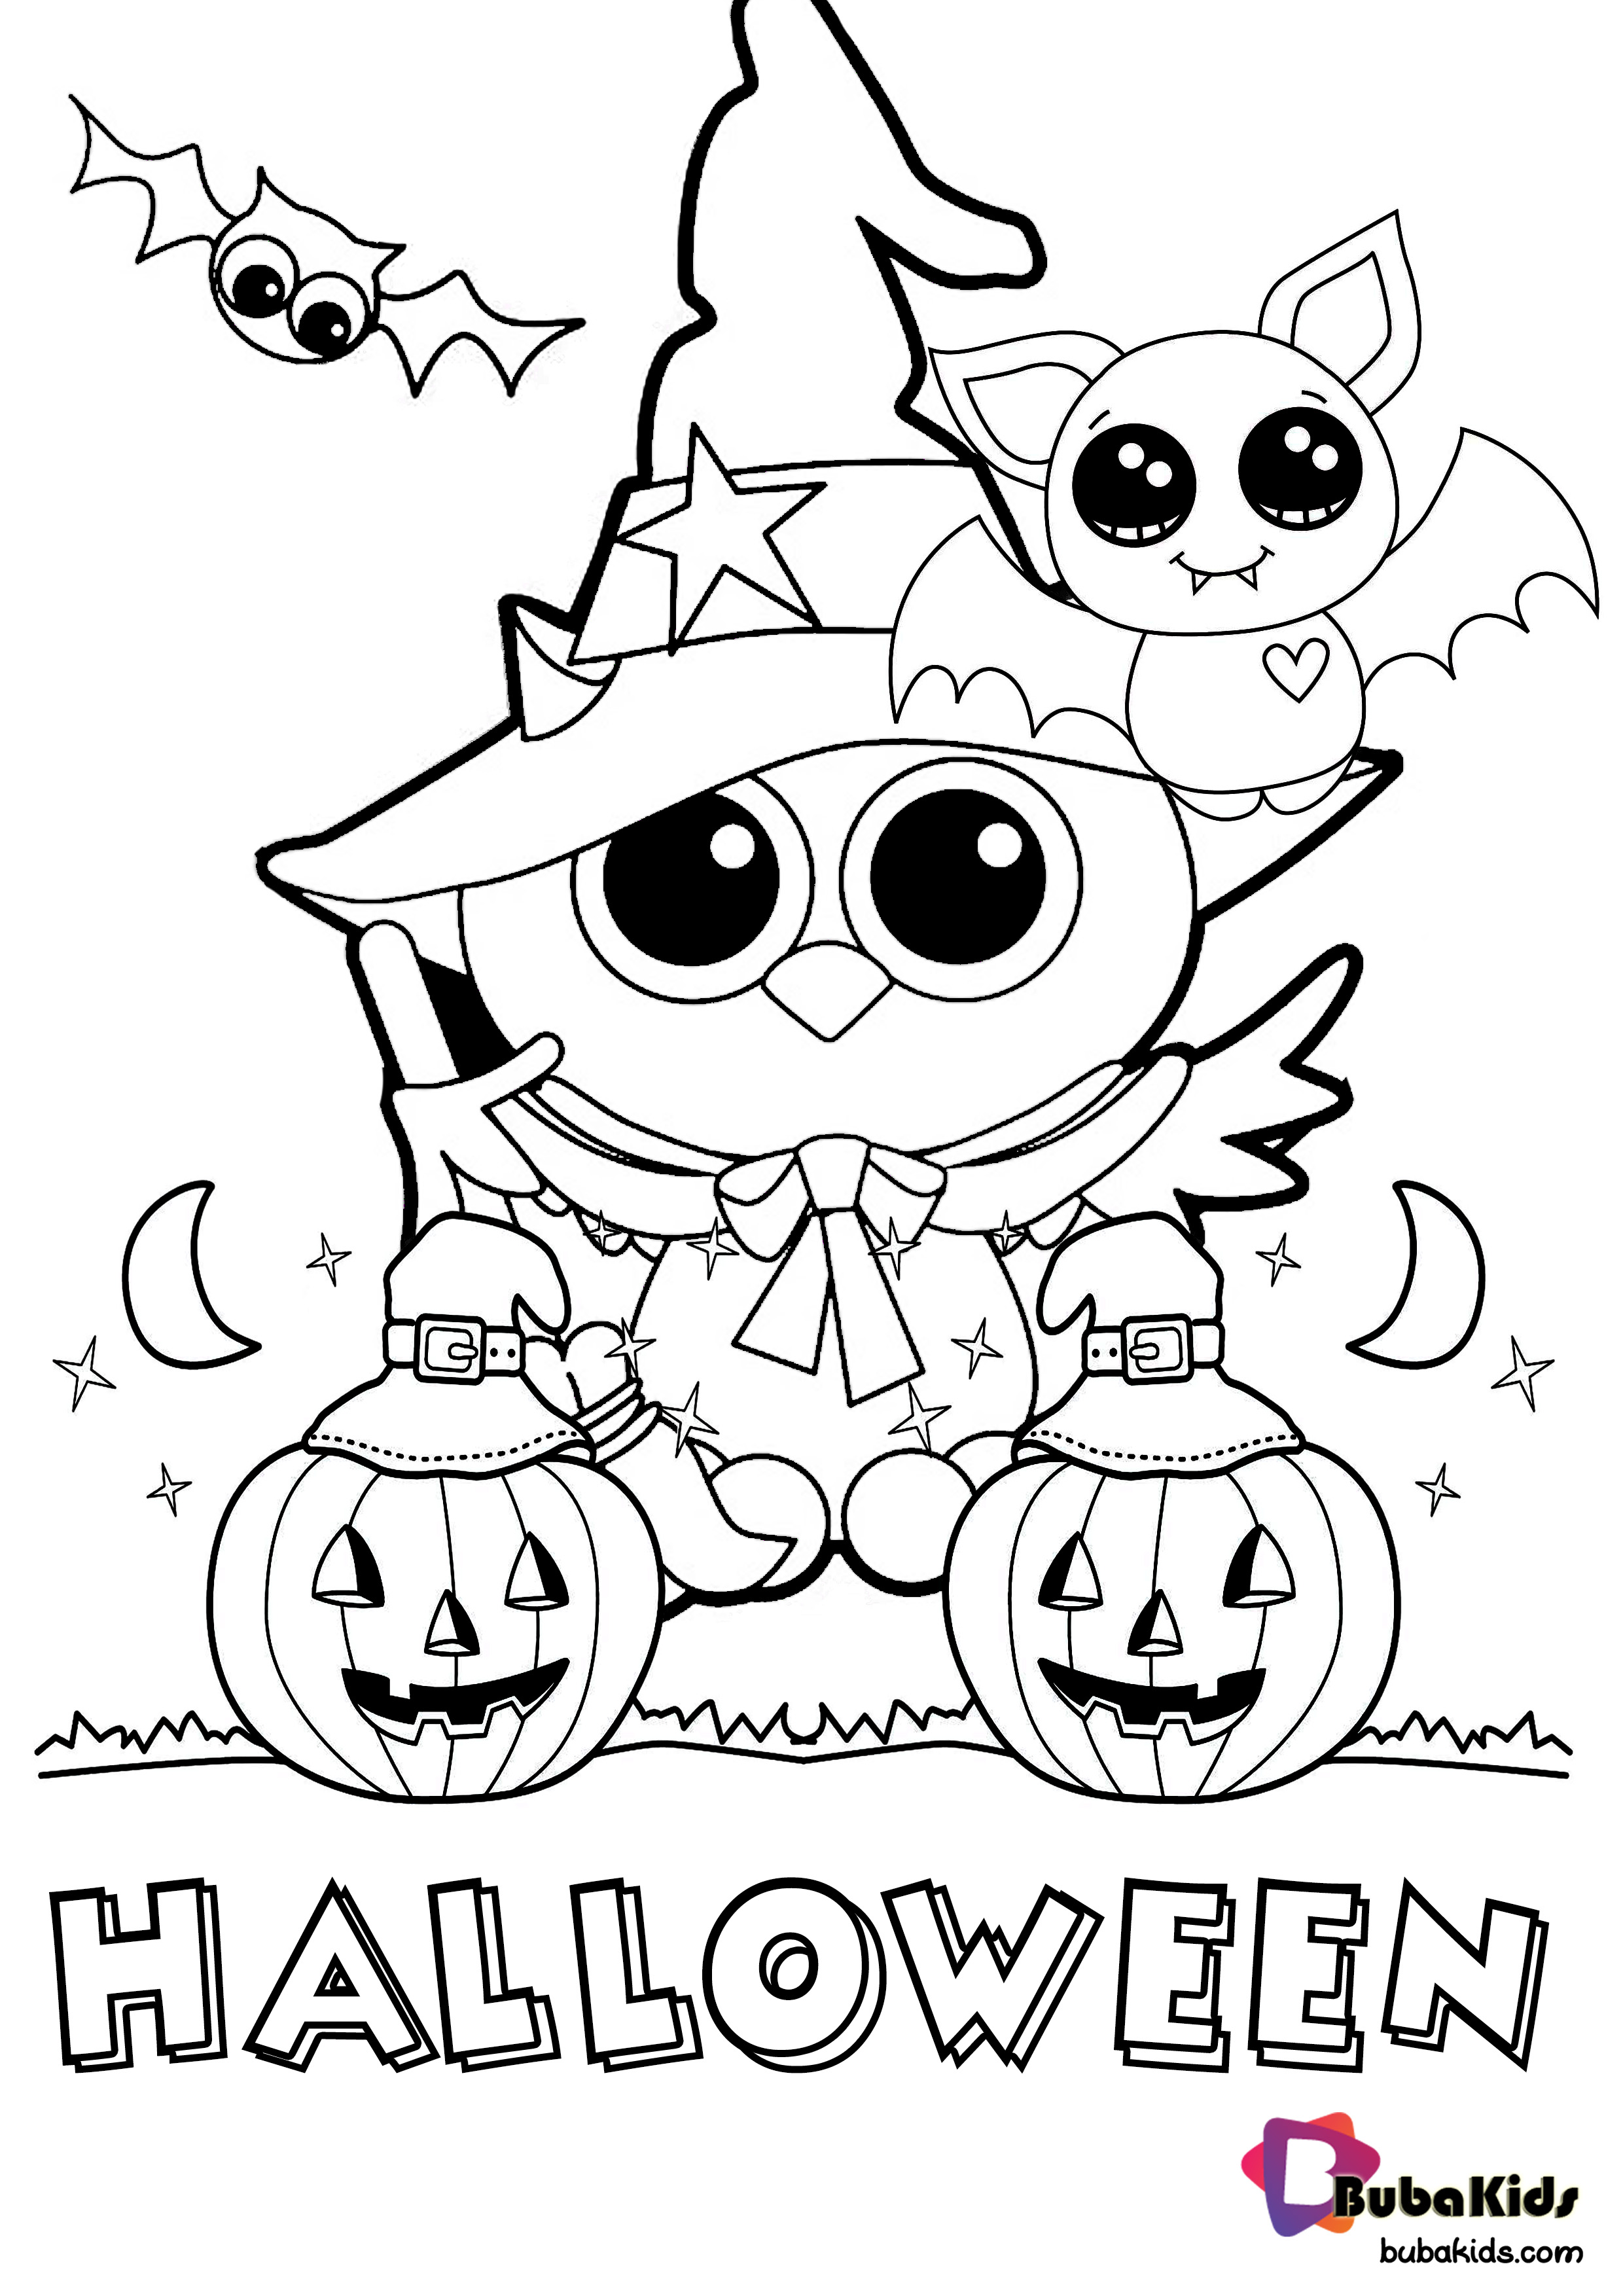 Best Halloween Pictures To Print And Color Coloring Pages Funny